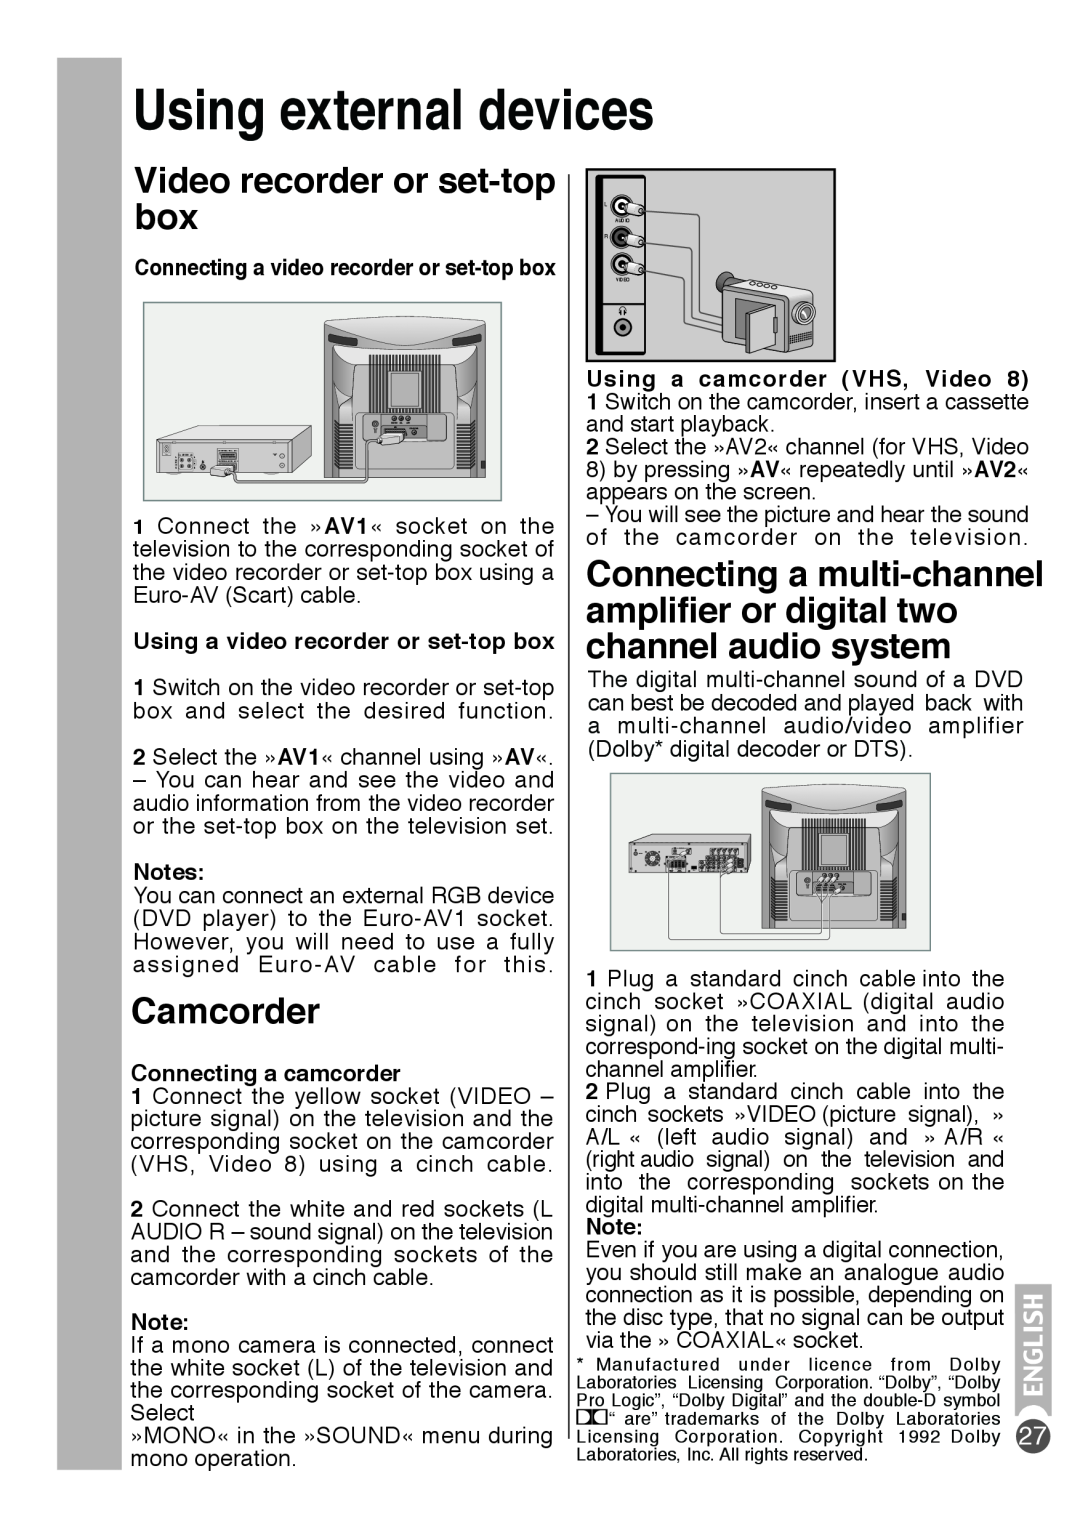 Beko E5 manual Video recorder or set-top box, Camcorder, Using external devices, Using a video recorder or set-top box 